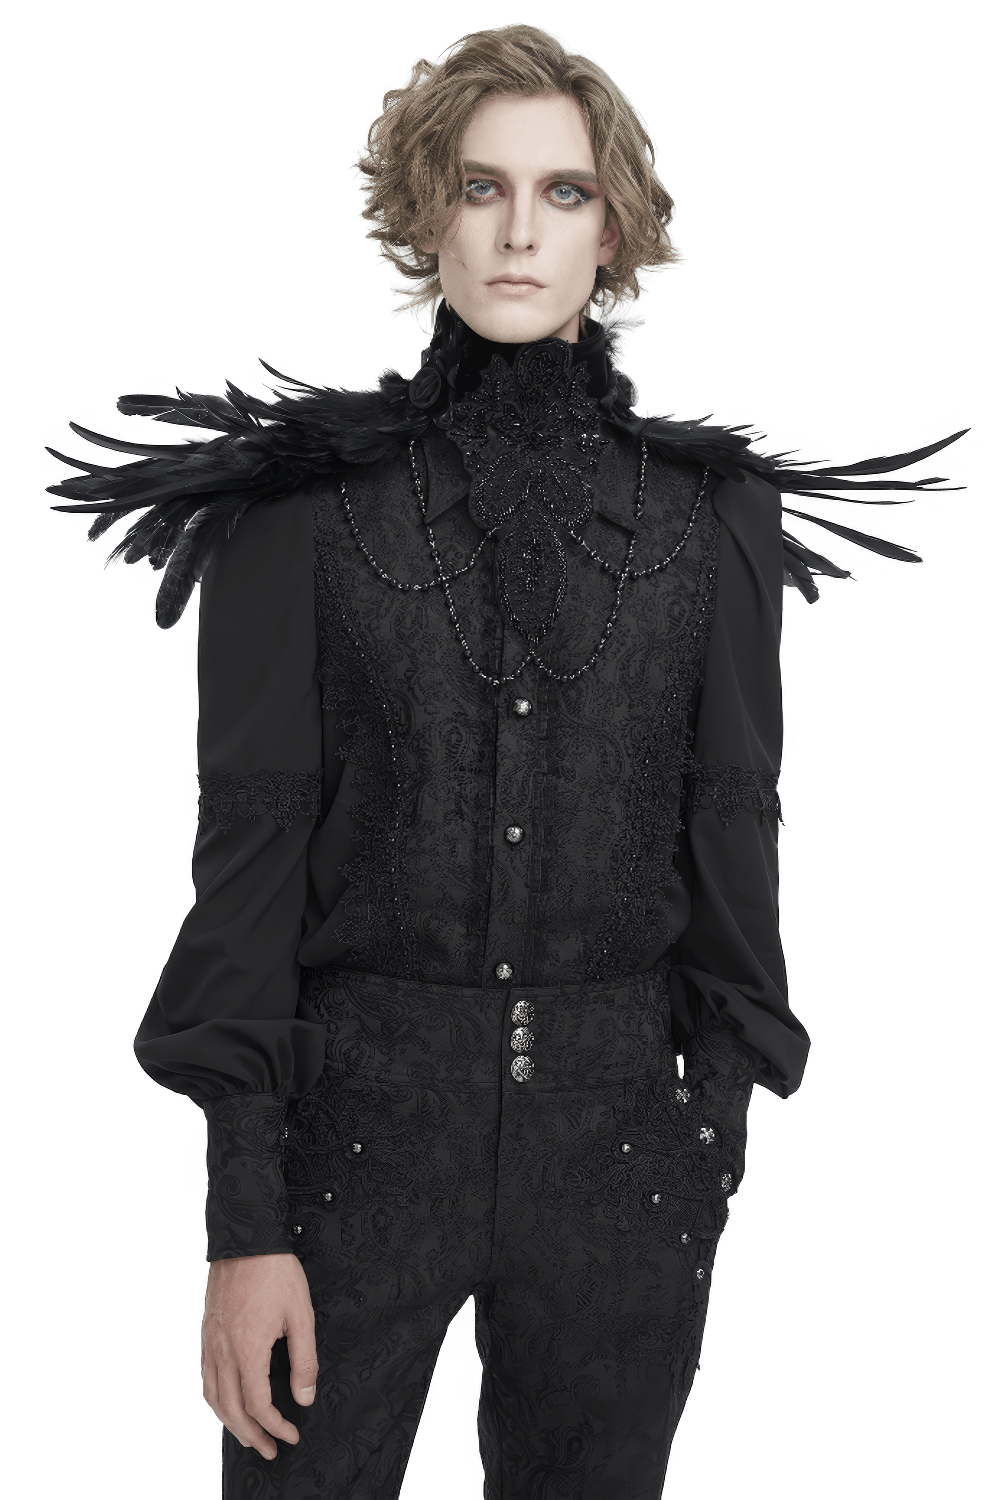 Unisex Gothic Beaded Feather Collar with Stand Neckwear